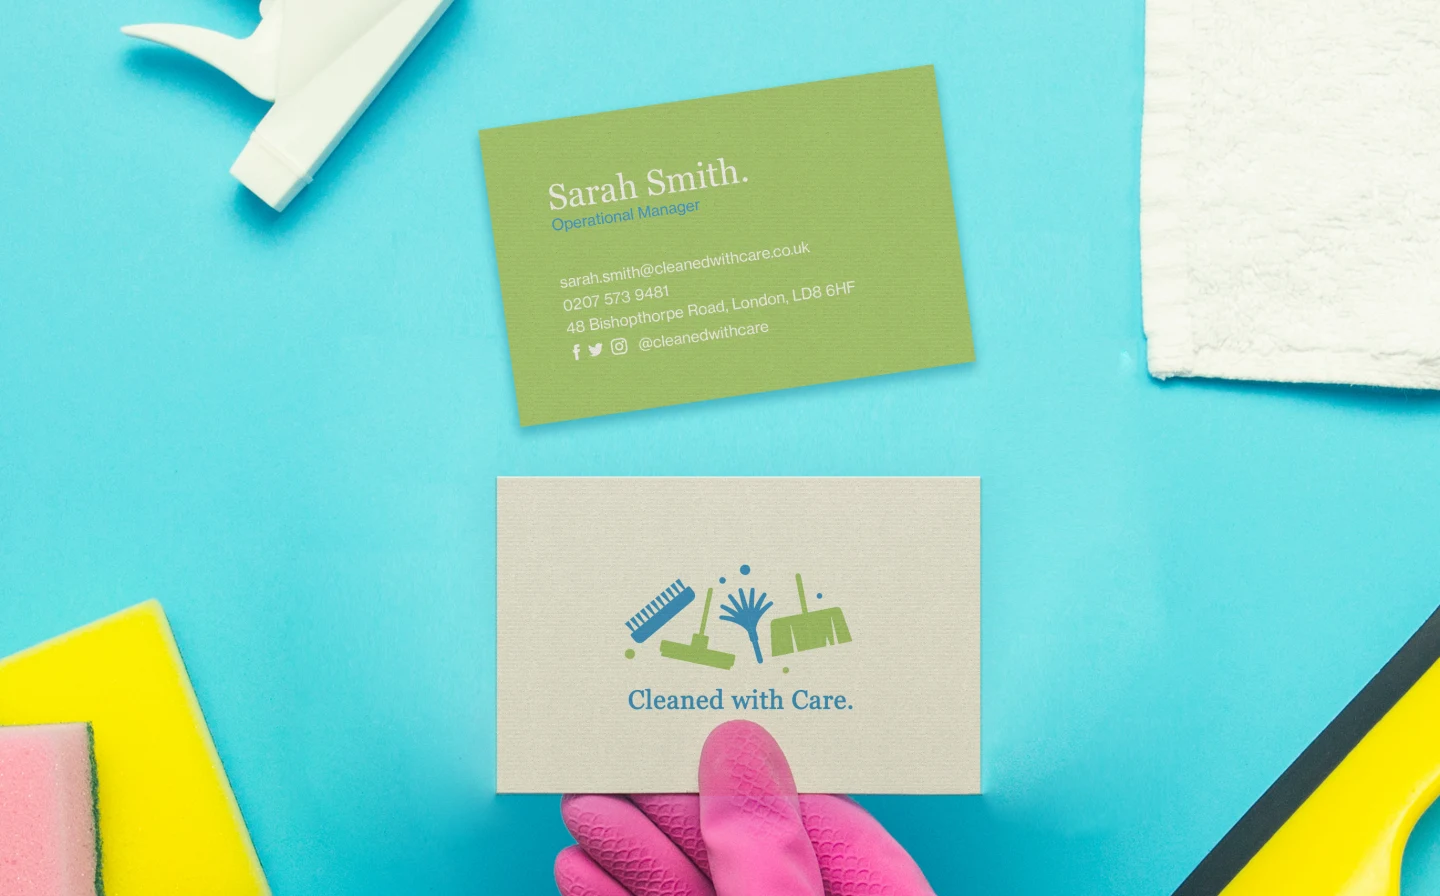 DomesticServices_Cleaner_Essential450gsmBusinessCards_1